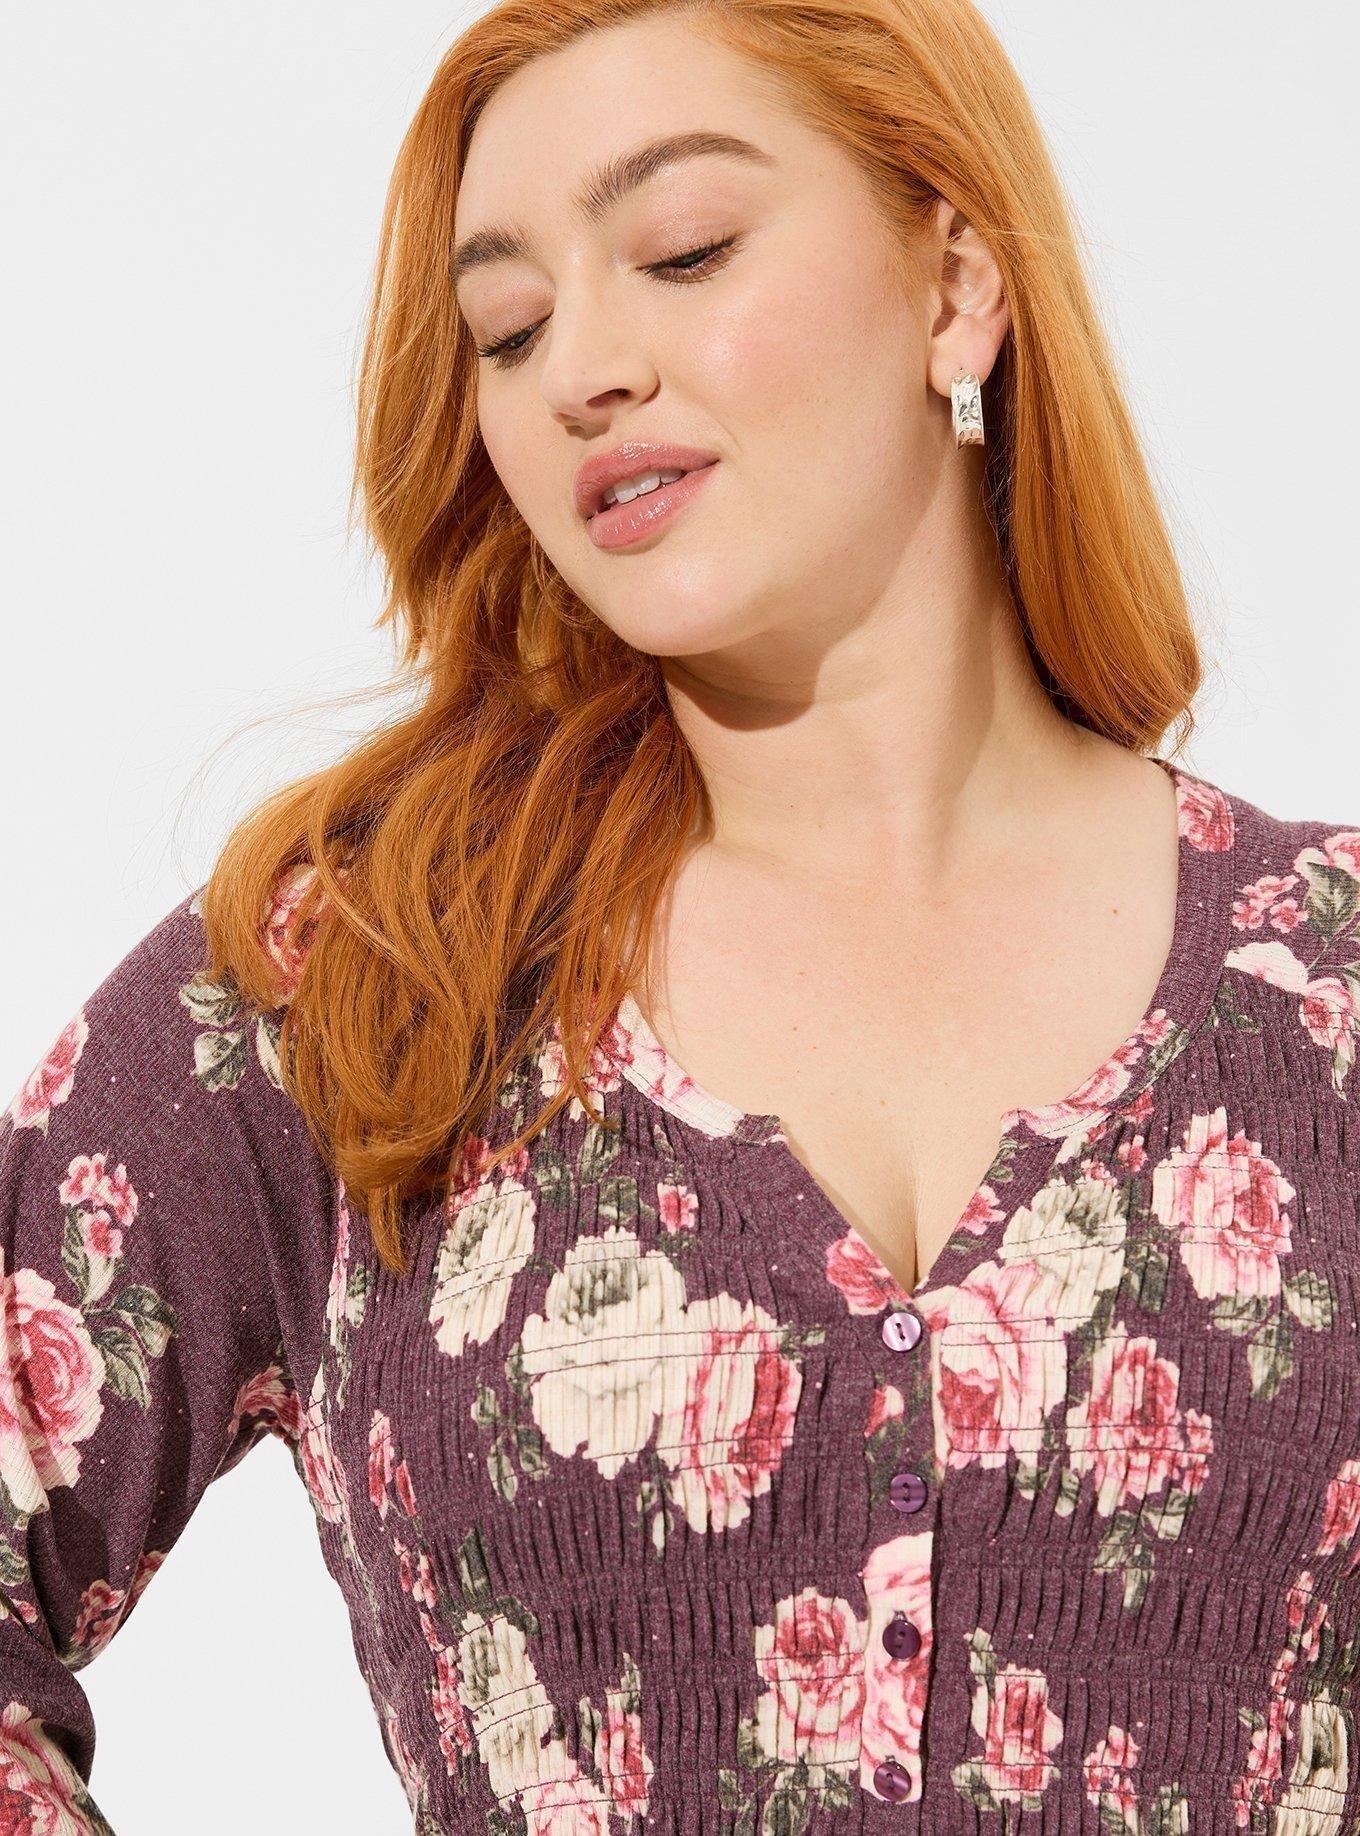 Plus Size - Smocked Stretch Lace Scoop Henley Top - Torrid